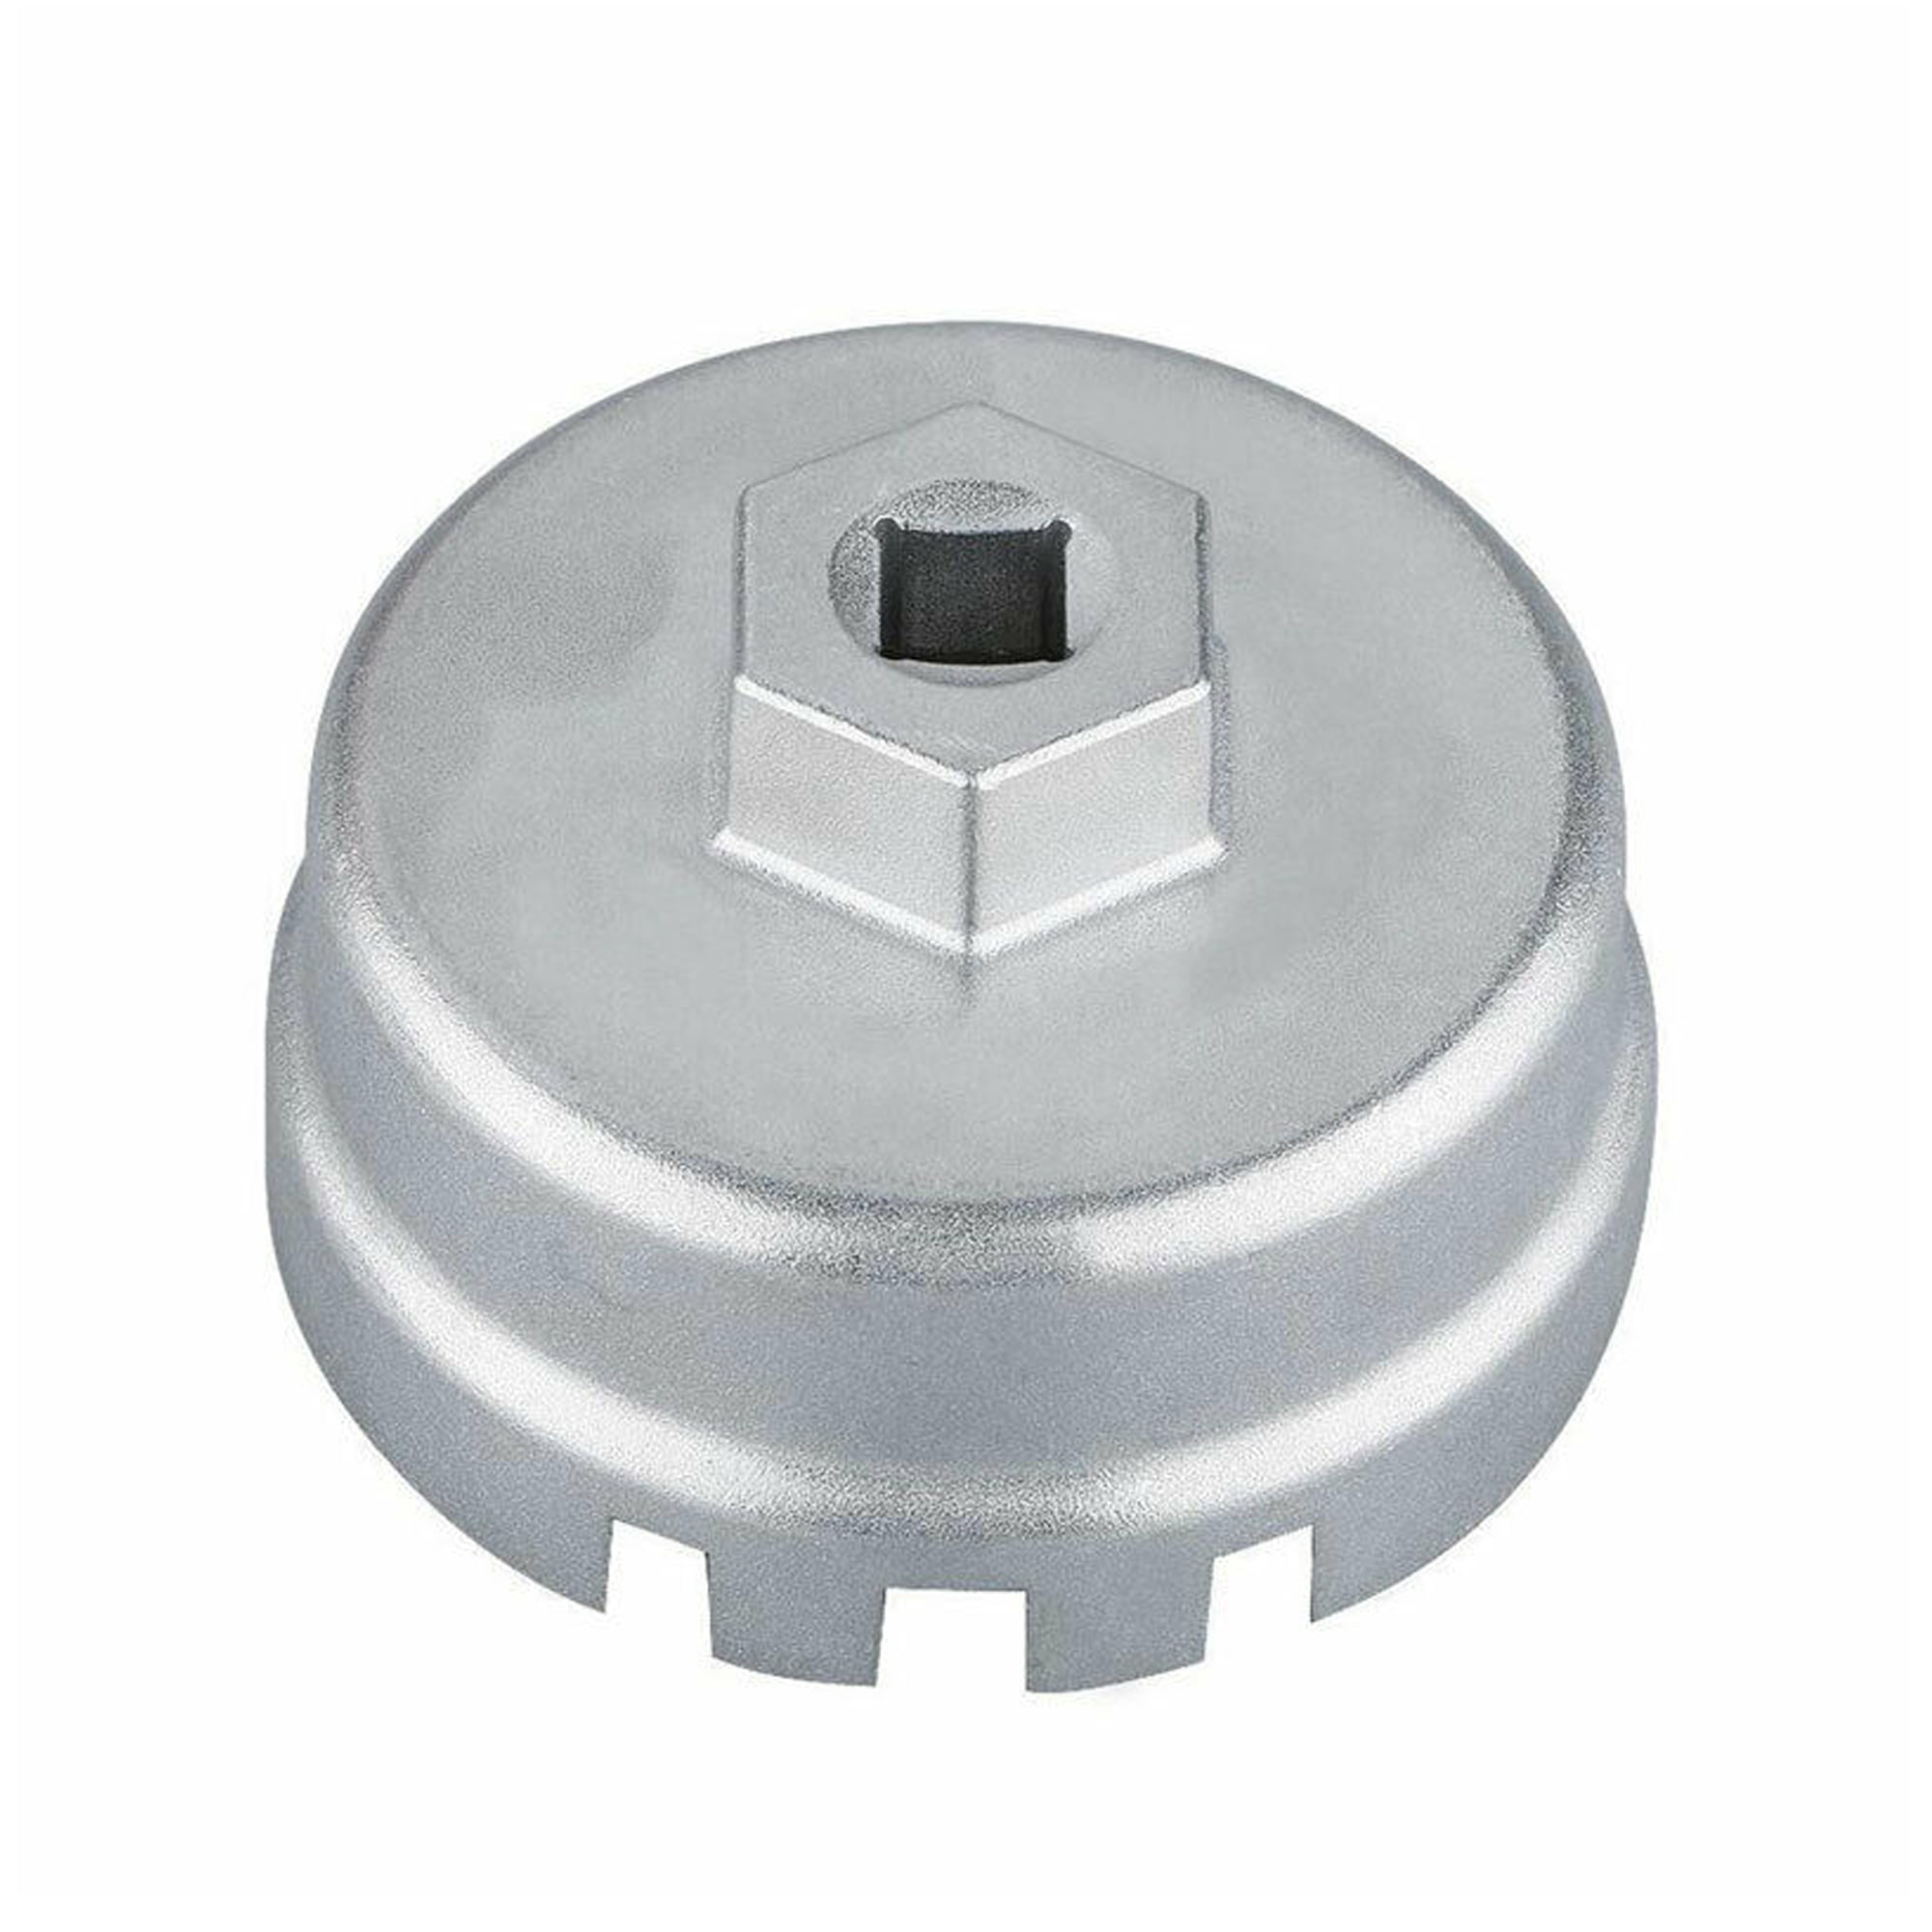 64mm Oil Filter Wrench Tool Housing Cap for Toyota Scion 1.8L 4 Cylinder Lexus